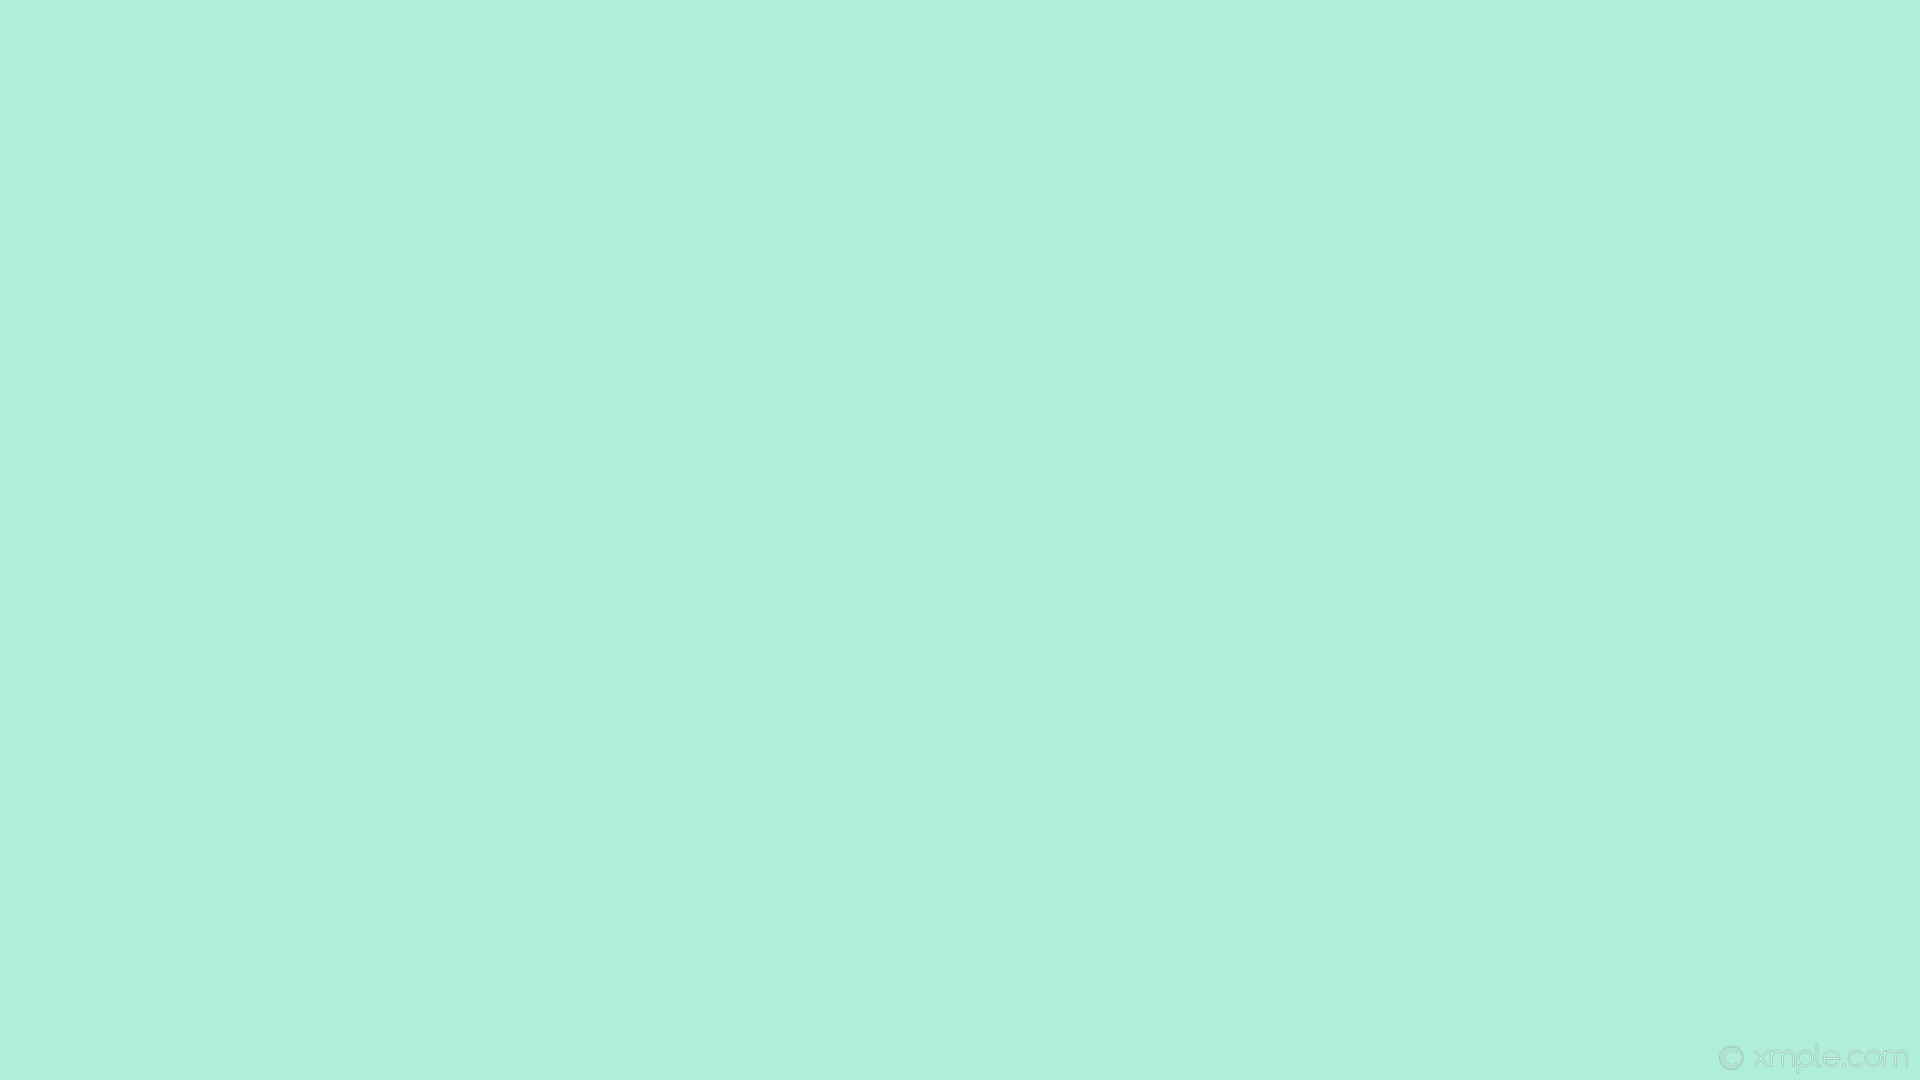 Wallpaper one colour single solid color turquoise plain light turquoise #b0eeda